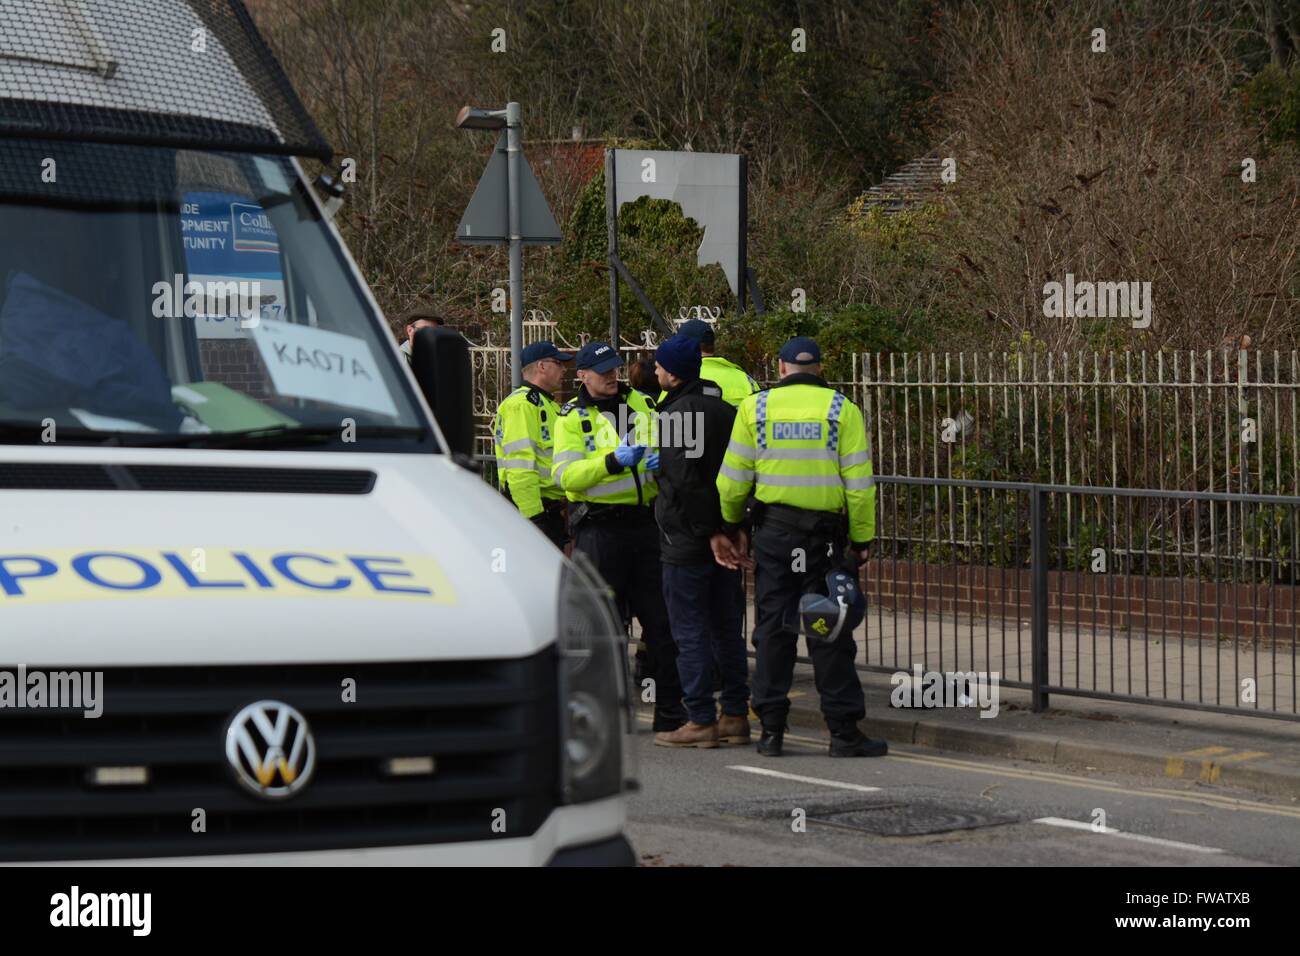 Dover, UK. 2nd April 2016. Clashes As Pro and Anti-refugee groups clash in Dover.  Police making a number of arrests. Credit: Marc Ward/Alamy Live News Stock Photo